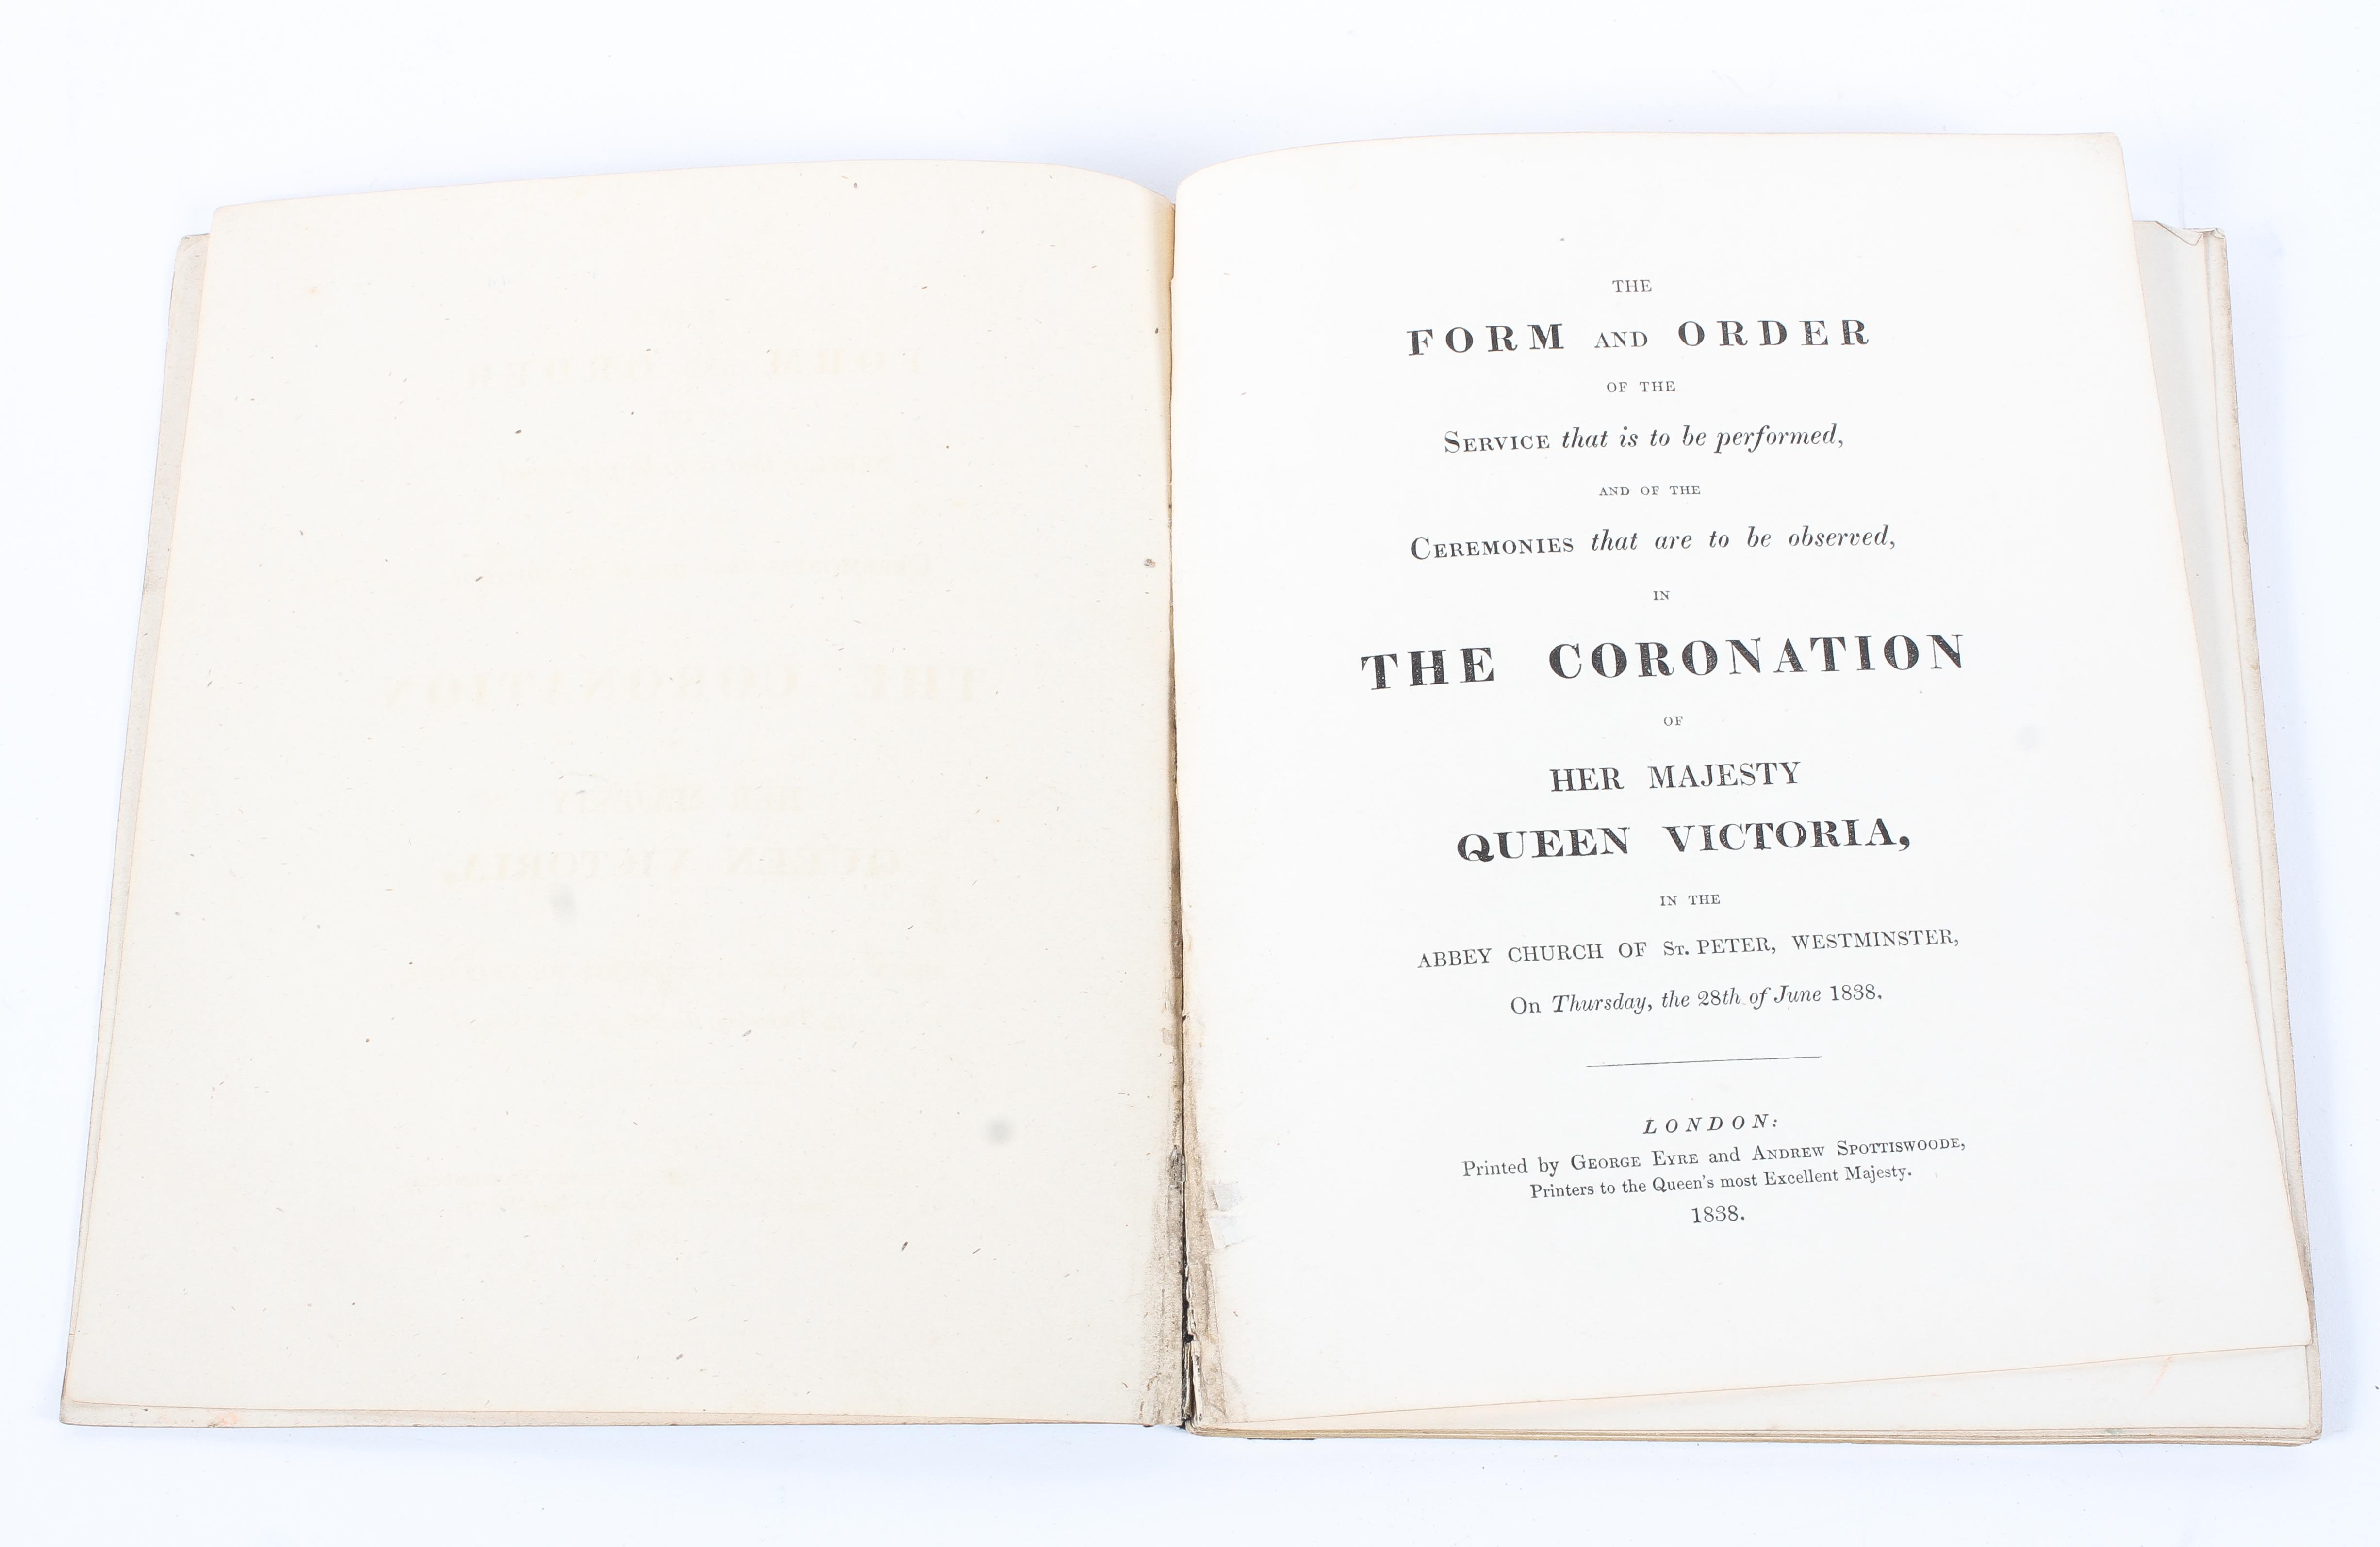 A copy of 'The Form and Order' of the Service for the coronation of Queen Victoria.